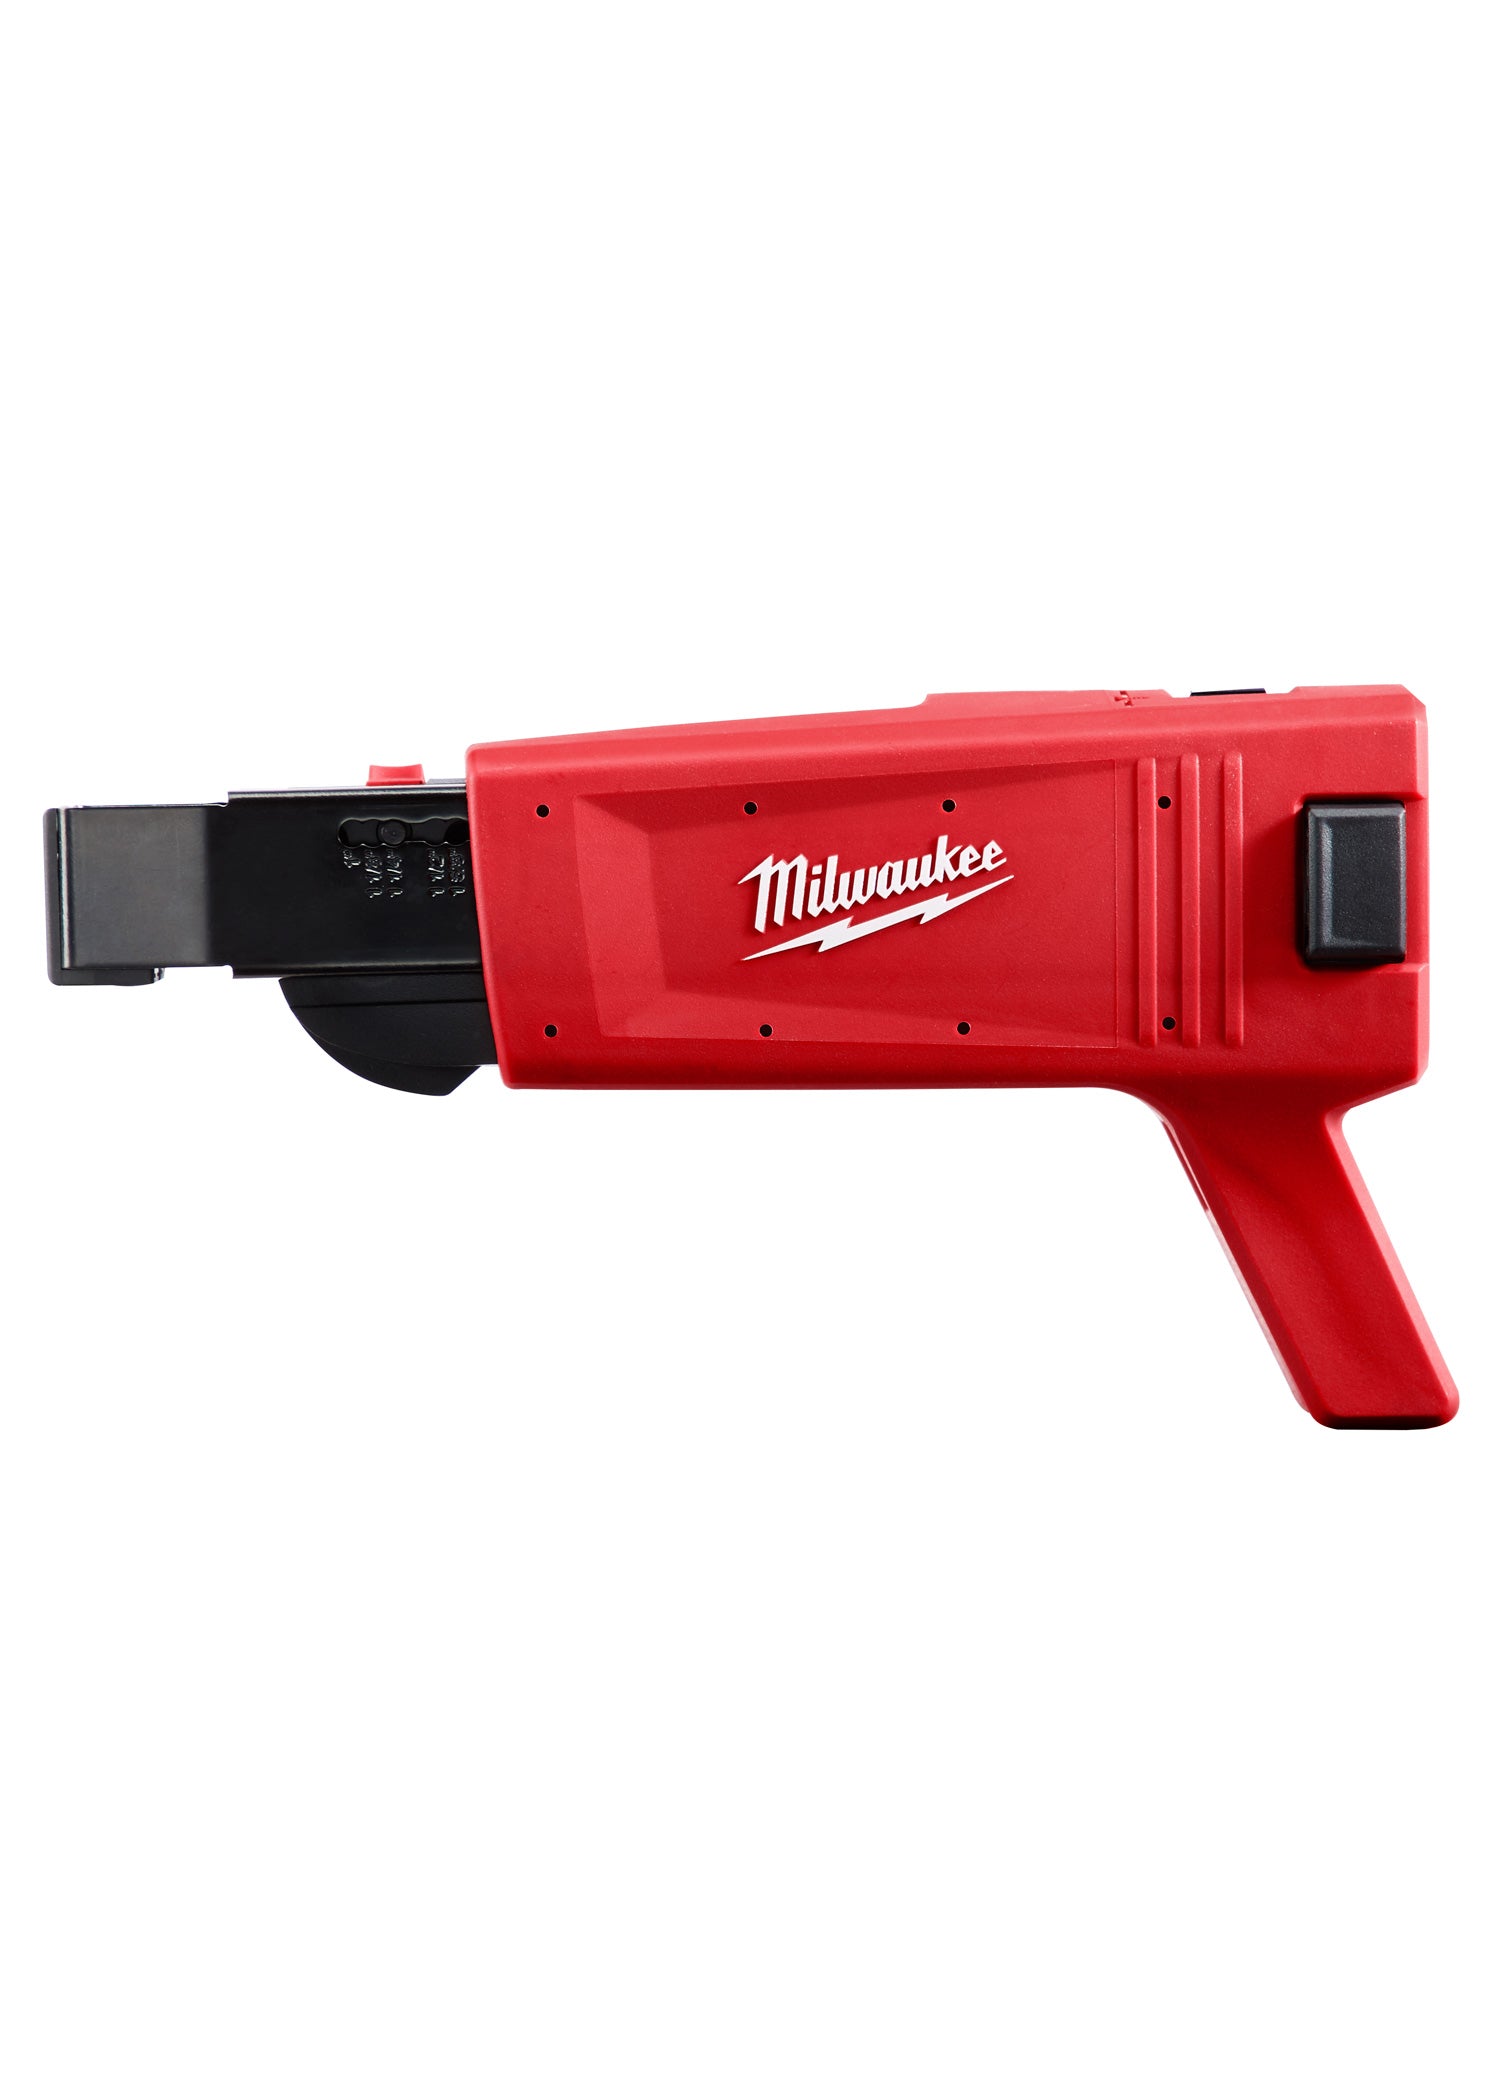 Milwaukee Drywall Collated Magazine Attachment